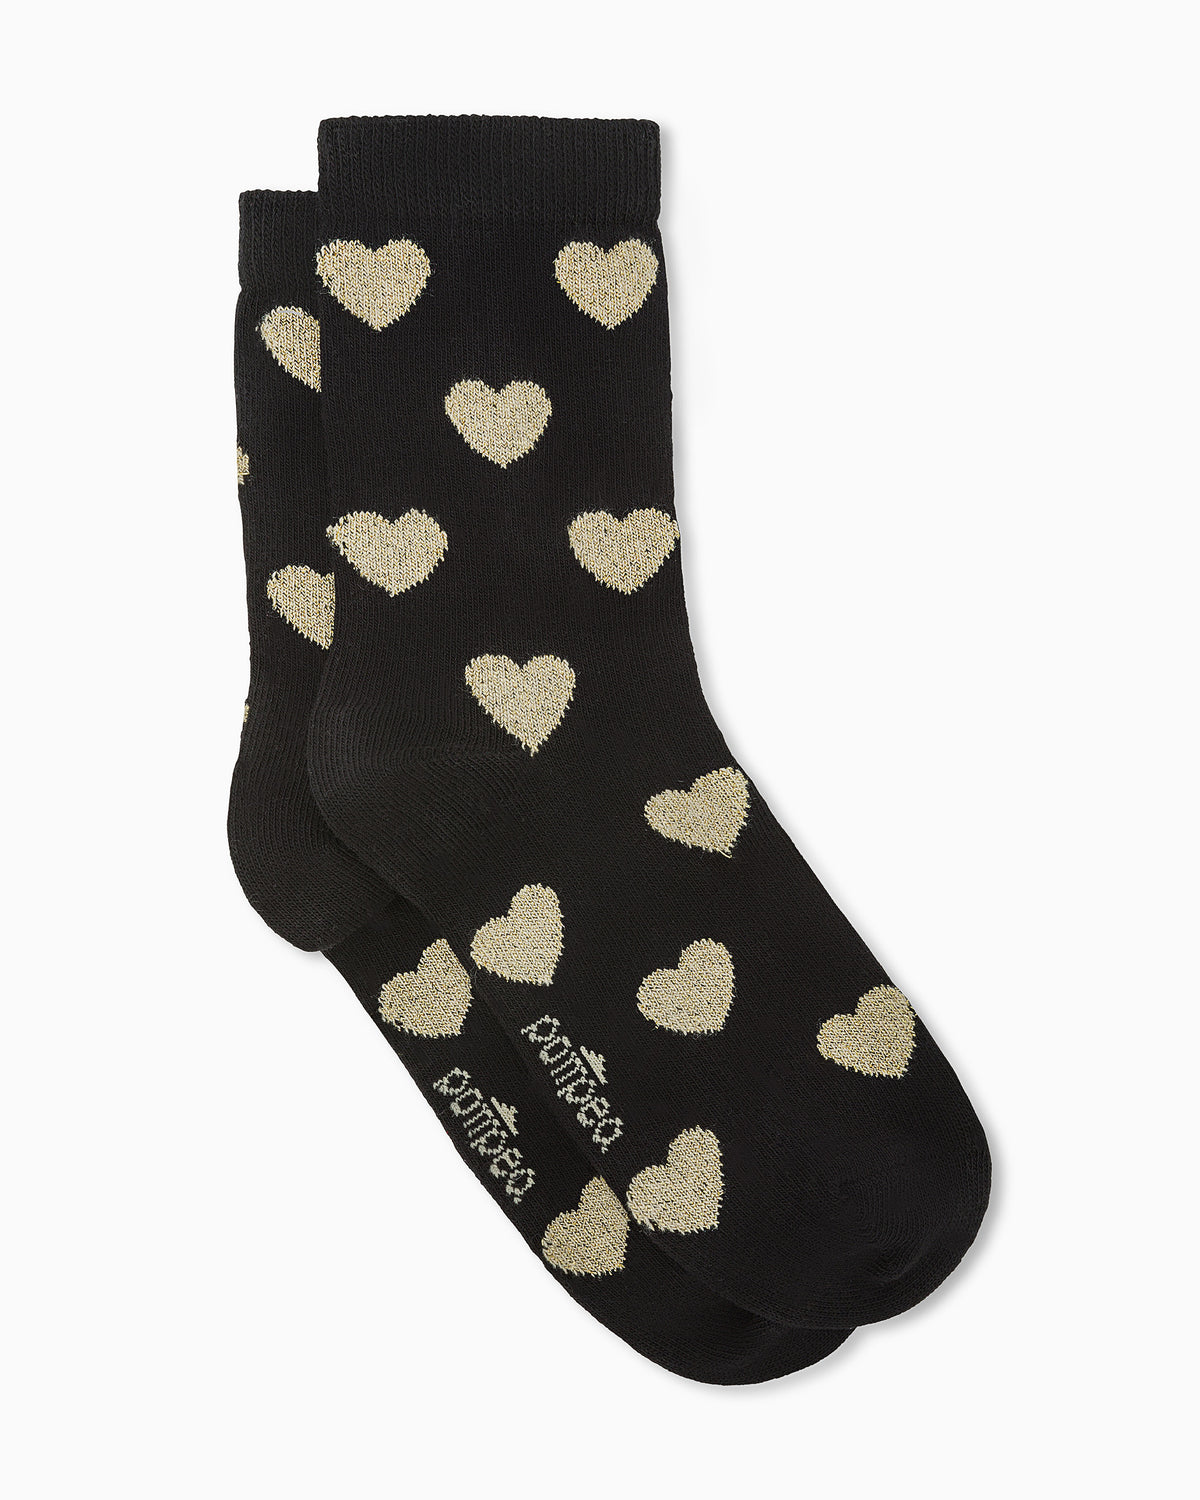 Erica girls’ sock with hearts